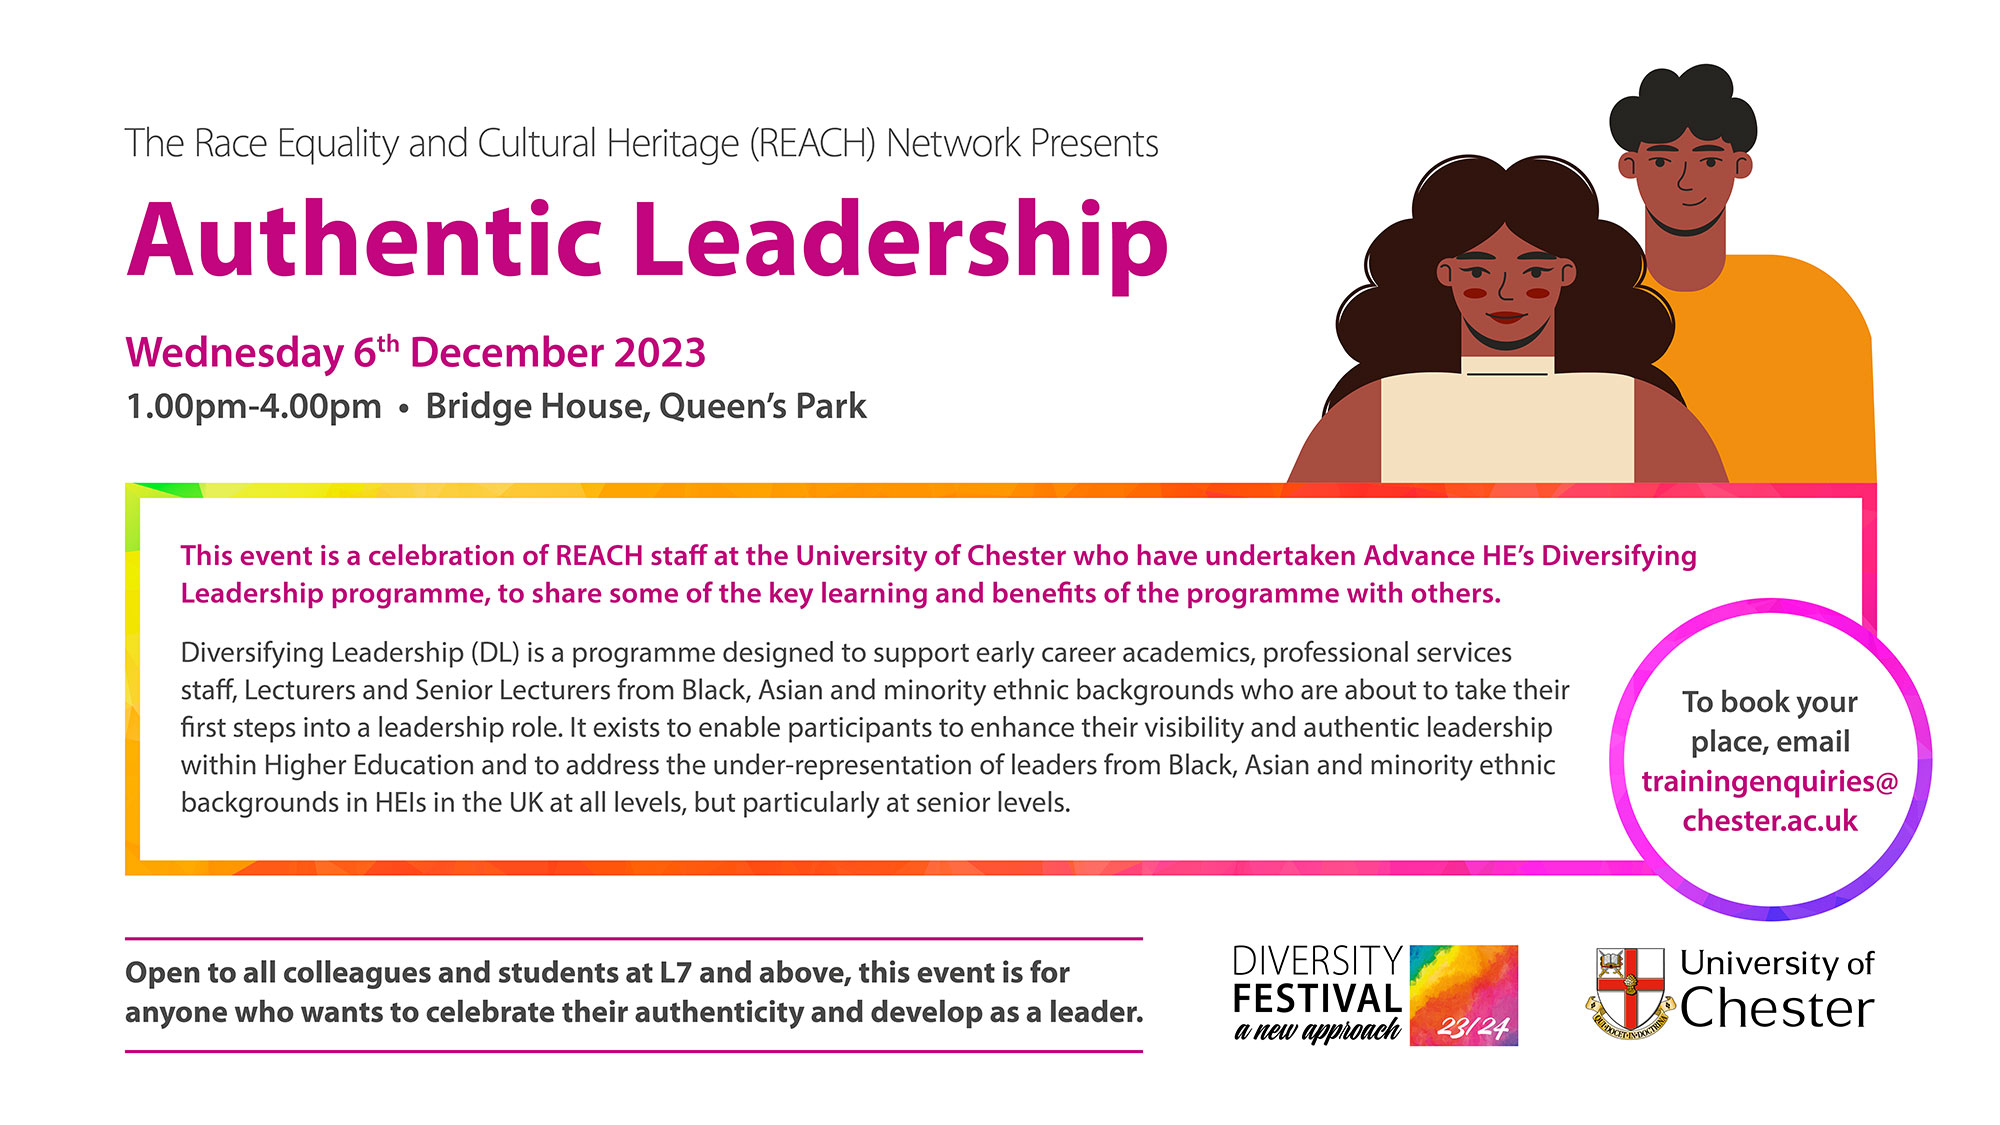 The Race Equality and Cultural Heritage (REACH) Network Presents: Authentic Leadership